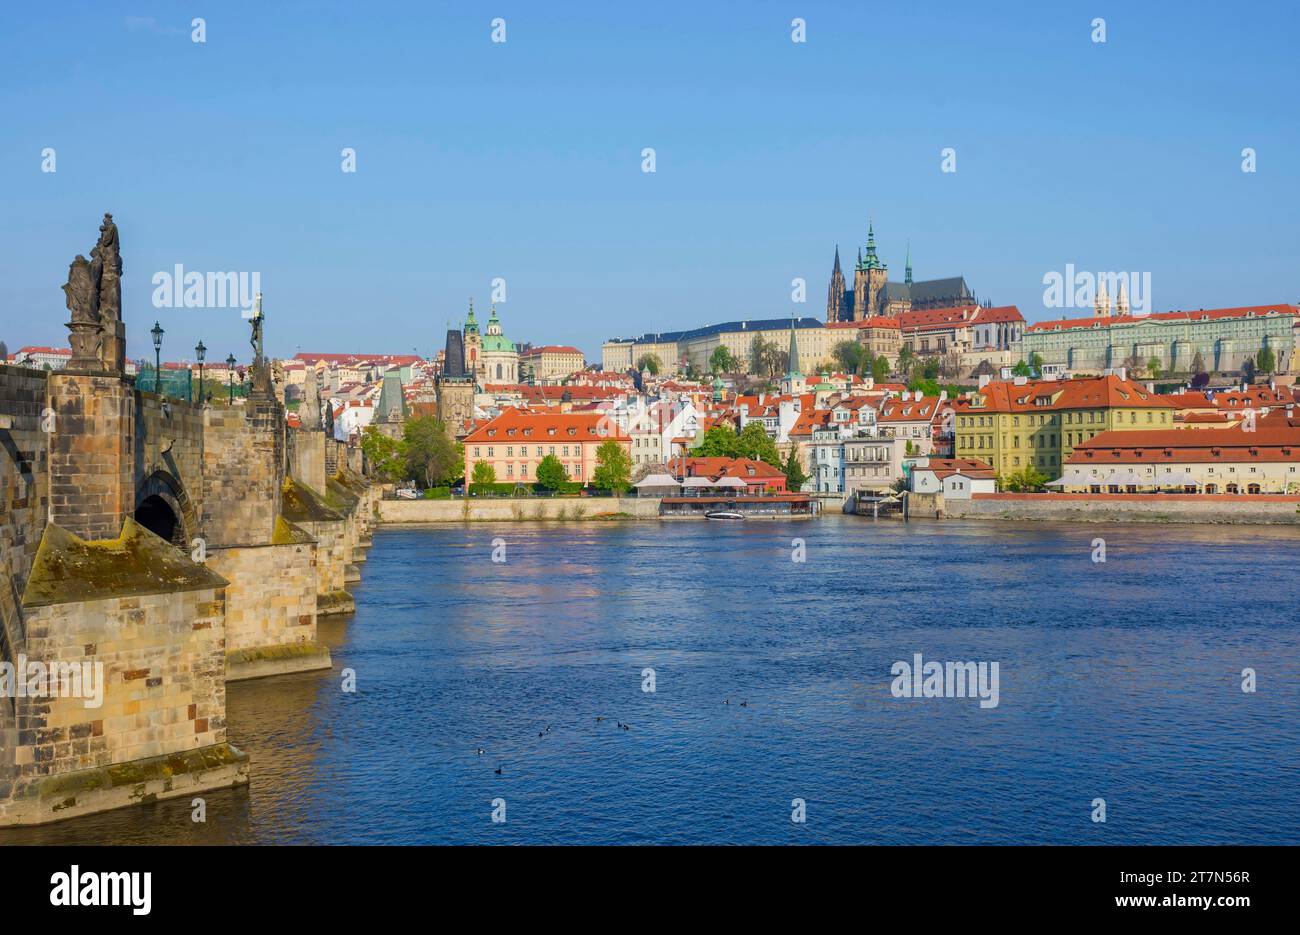 Famous Charles Bridge on Vltava River with Hradcany castle and St. Vitus Cathedral in Prague, Czech Republic, in sunny day Stock Photo